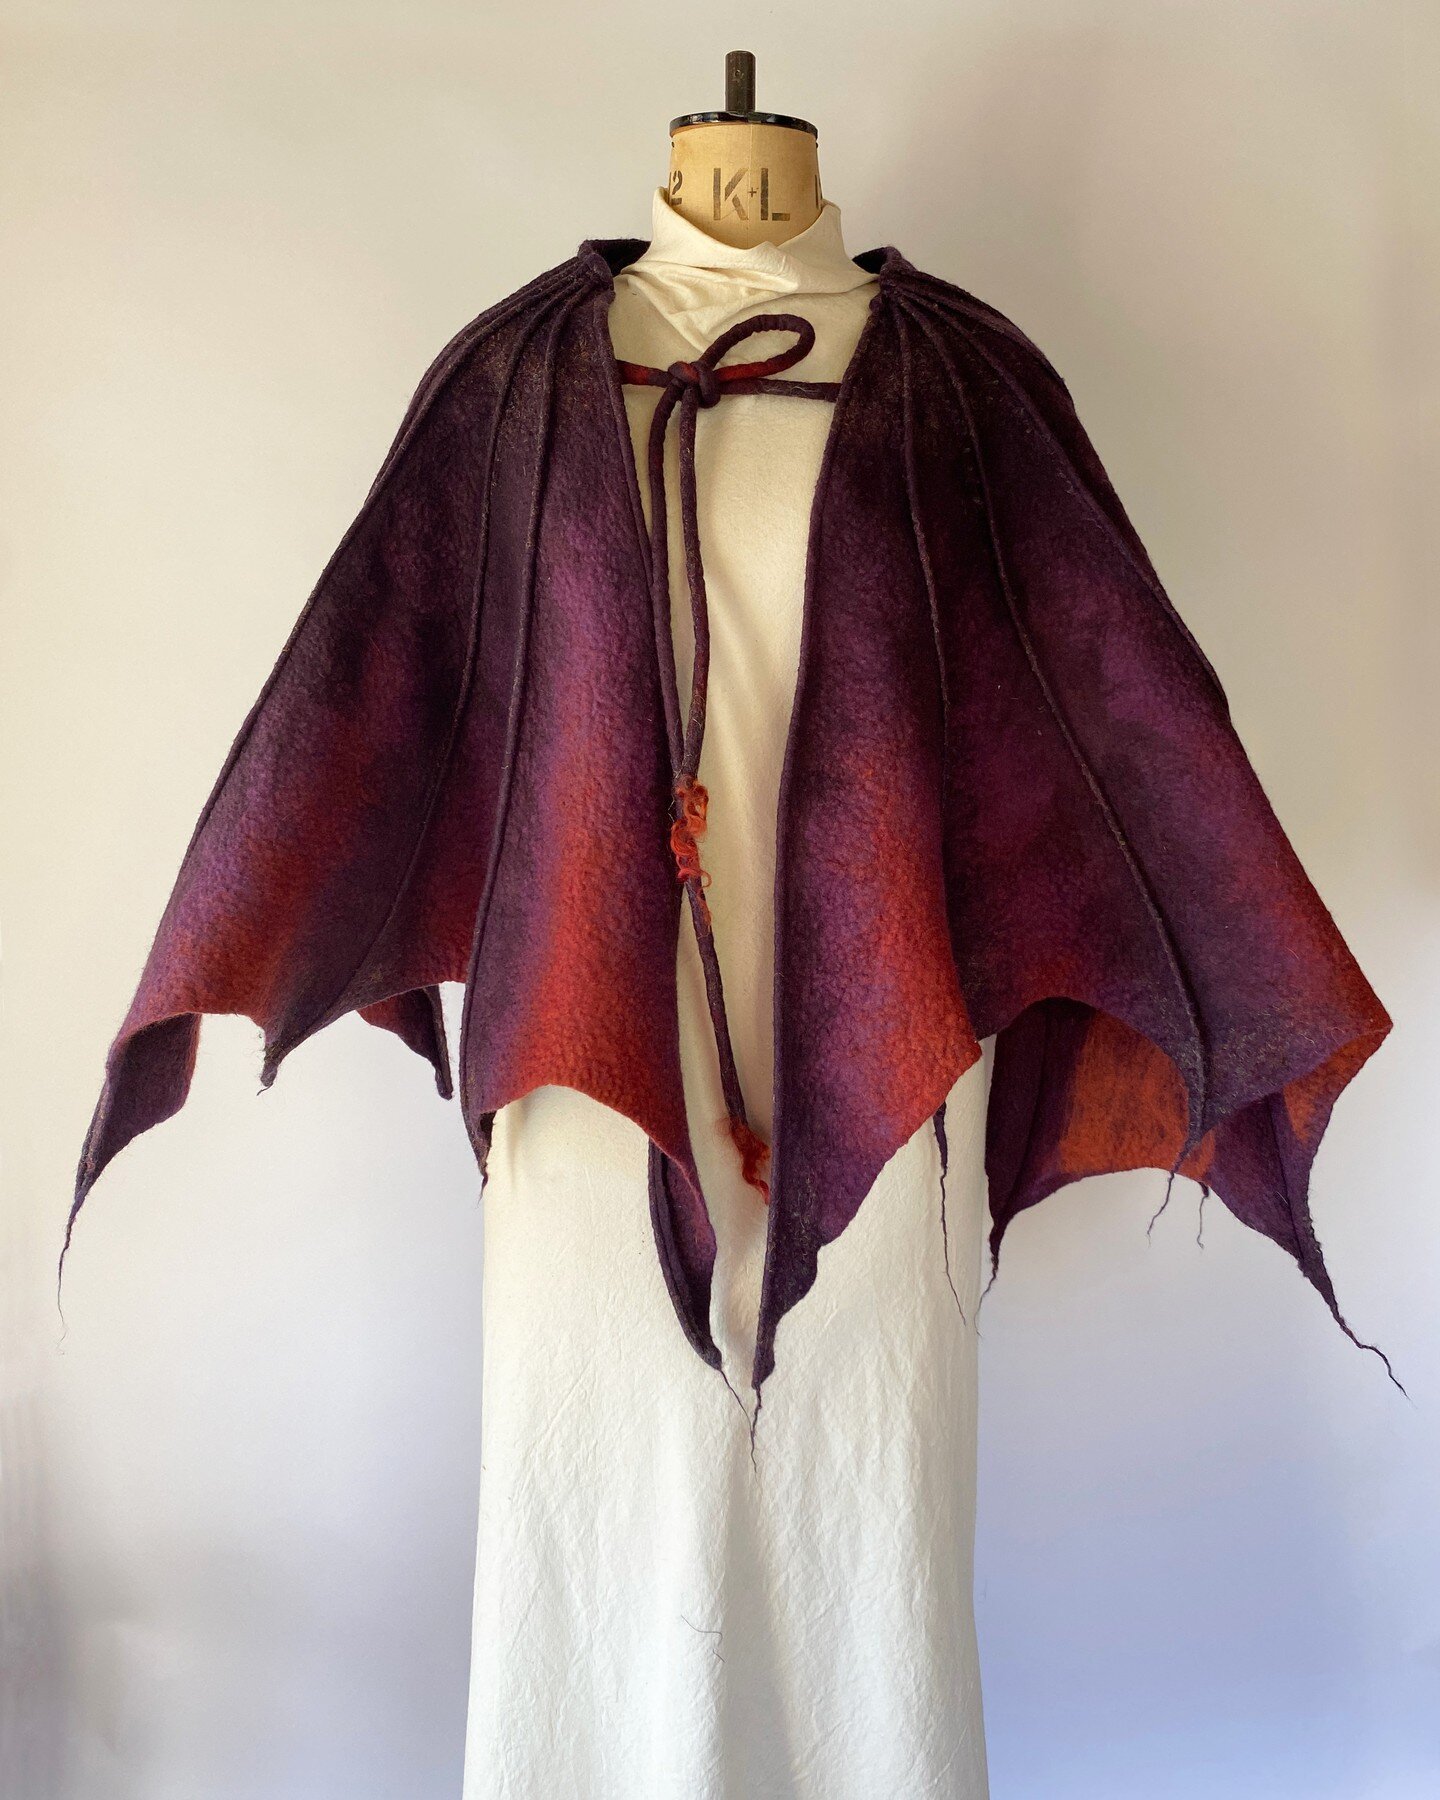 AwesomeCon here we come! One of my aspirations this year is 'No panicking right before a show!'. So far.....so so. 😏 The 'Twilight Dragon Wing cape' is the show exclusive AwesomeCon this year. I've been working on this design for over a year. Make s